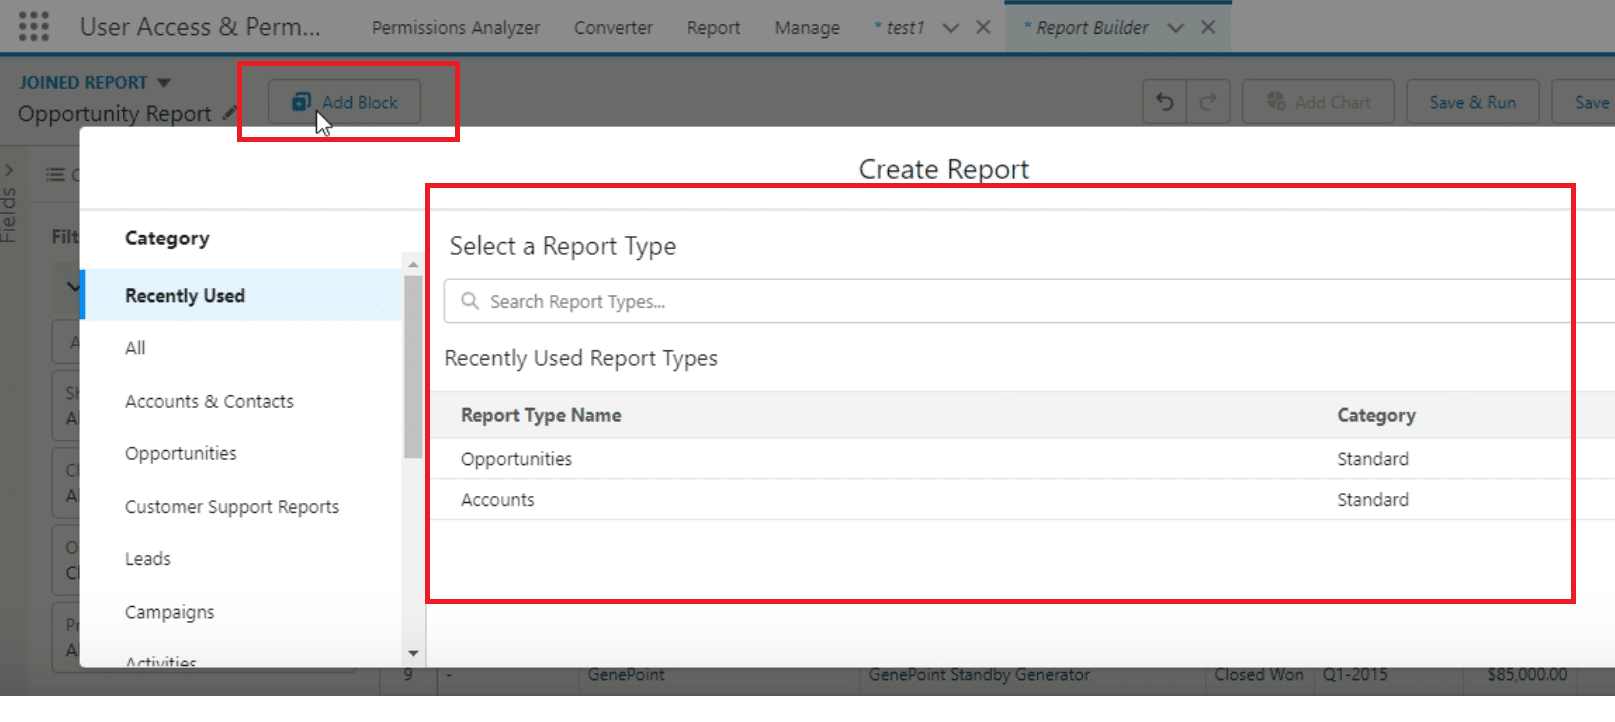 Adding and configuring the second block in the joined report